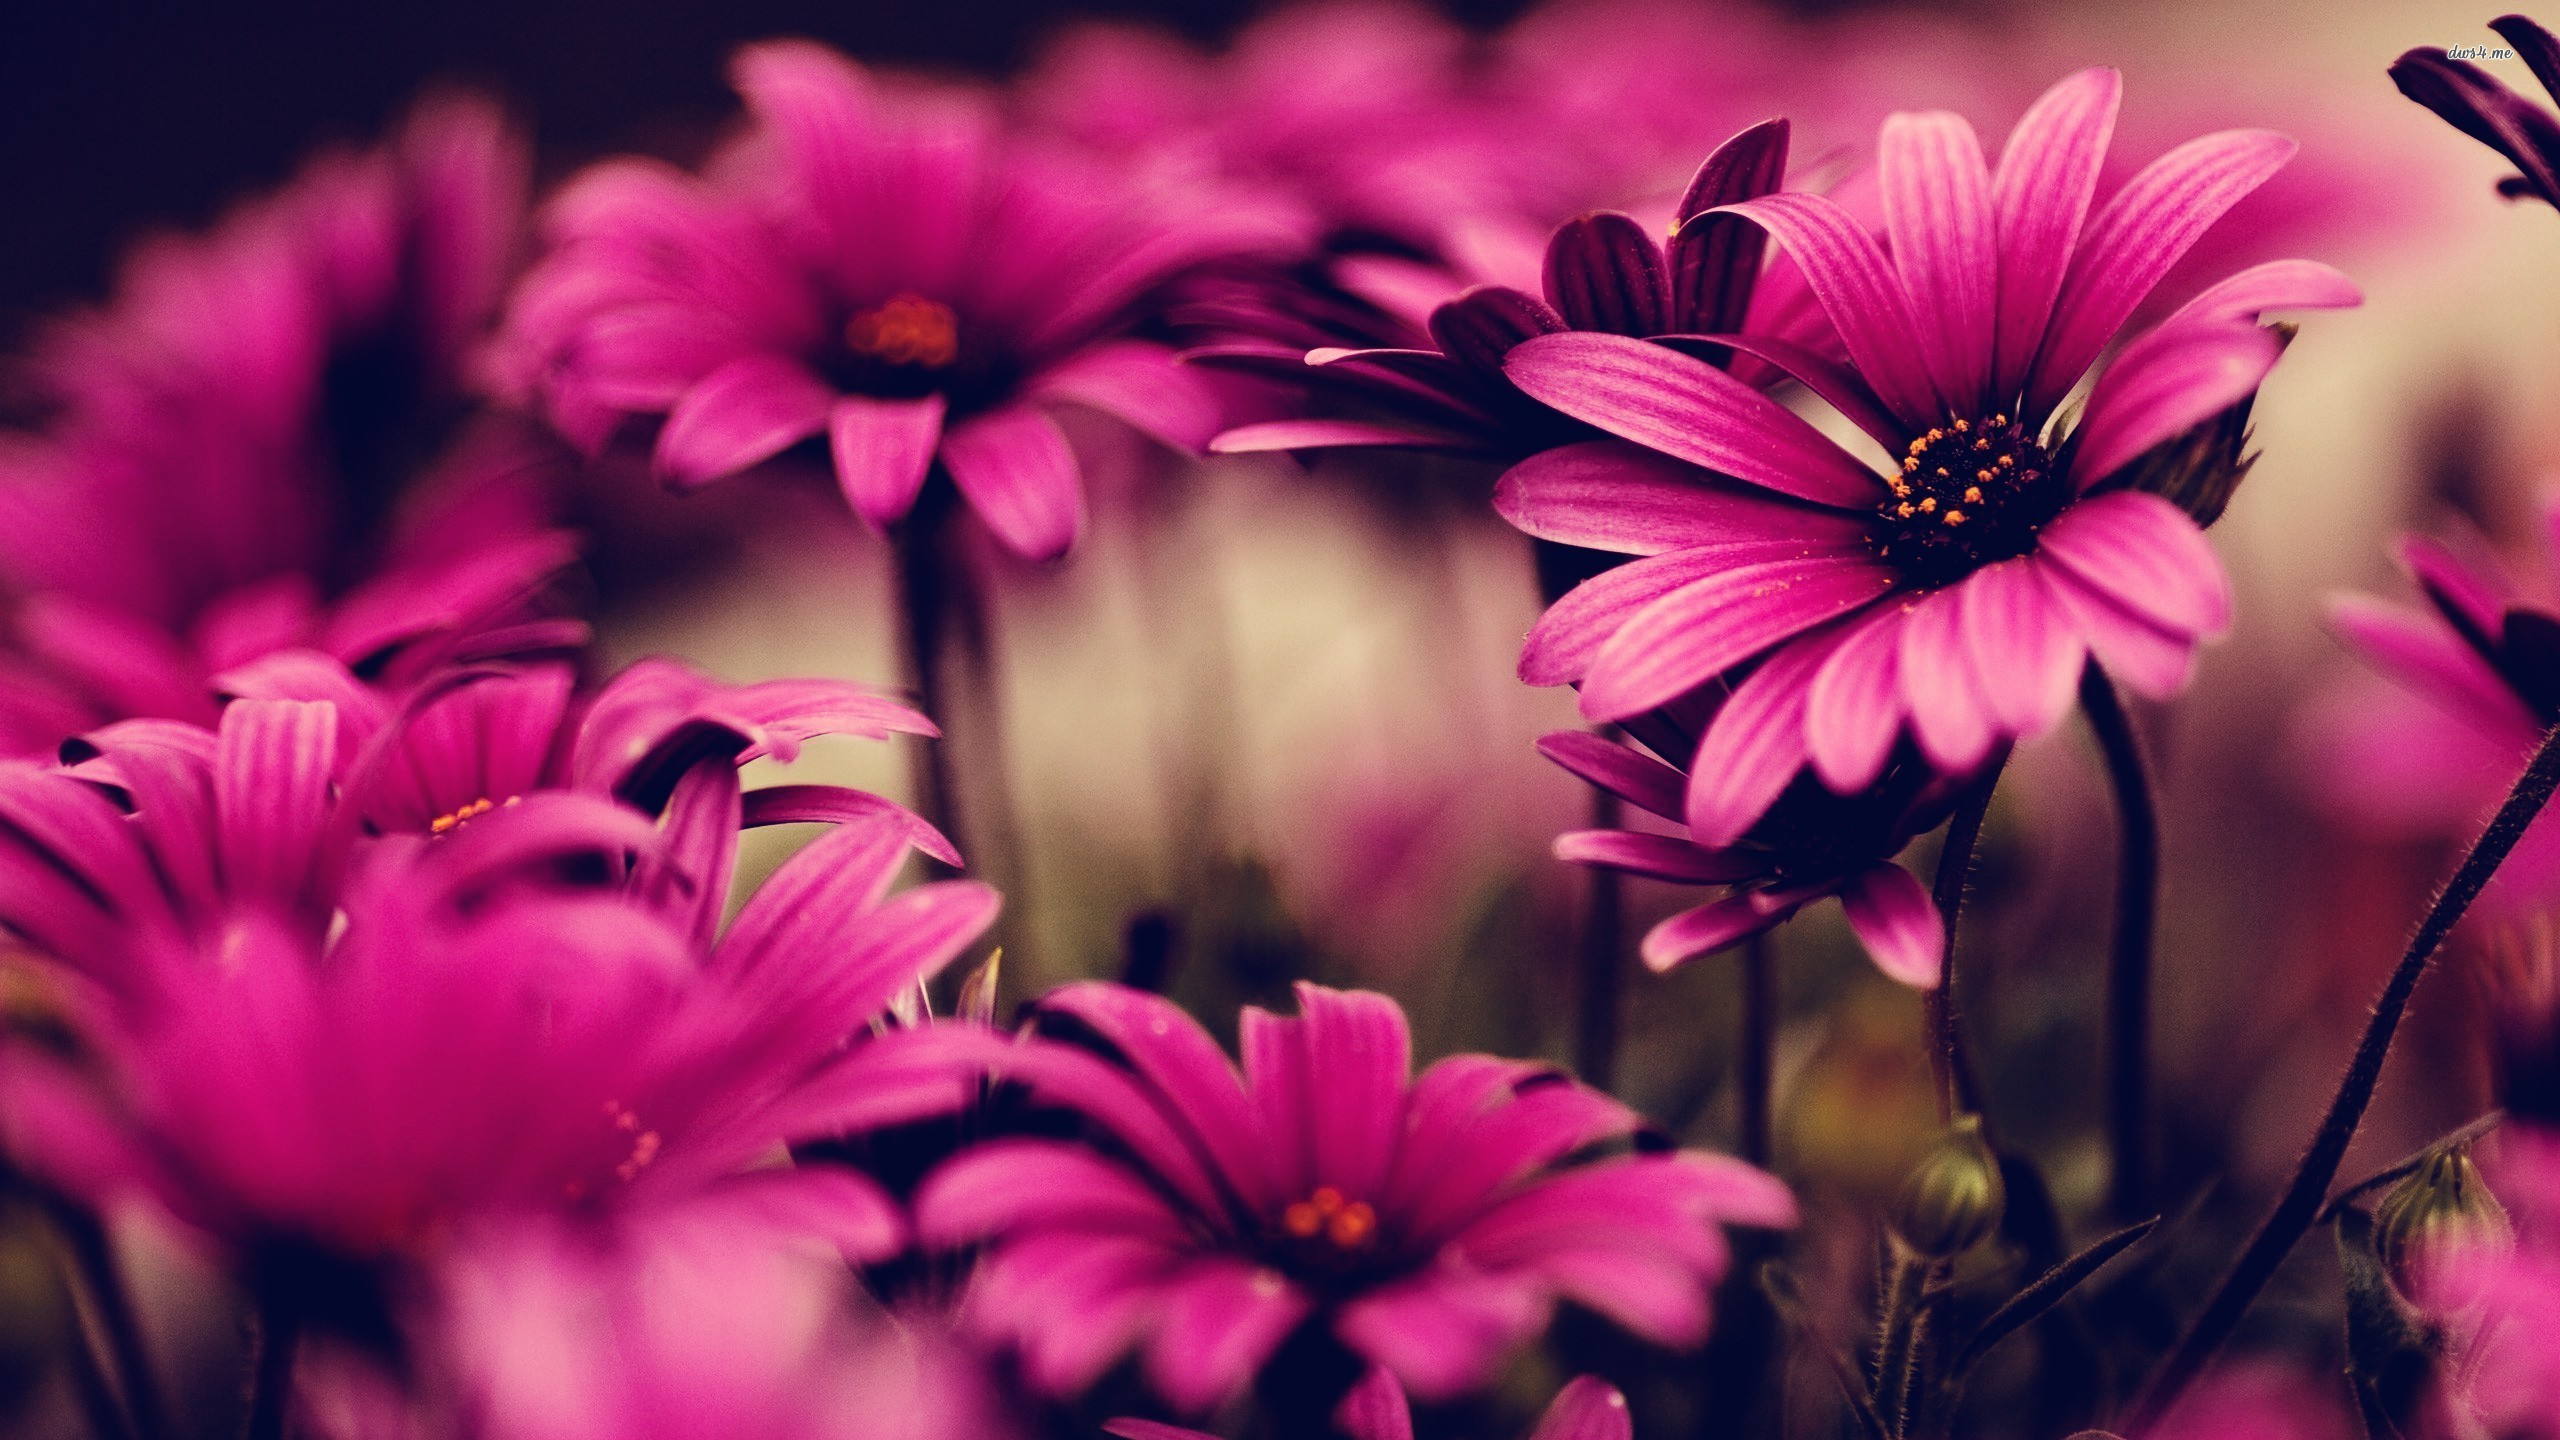 Free download Pics Photos Fb Covers Hd Cover Photo Hd Flower 2560x1440